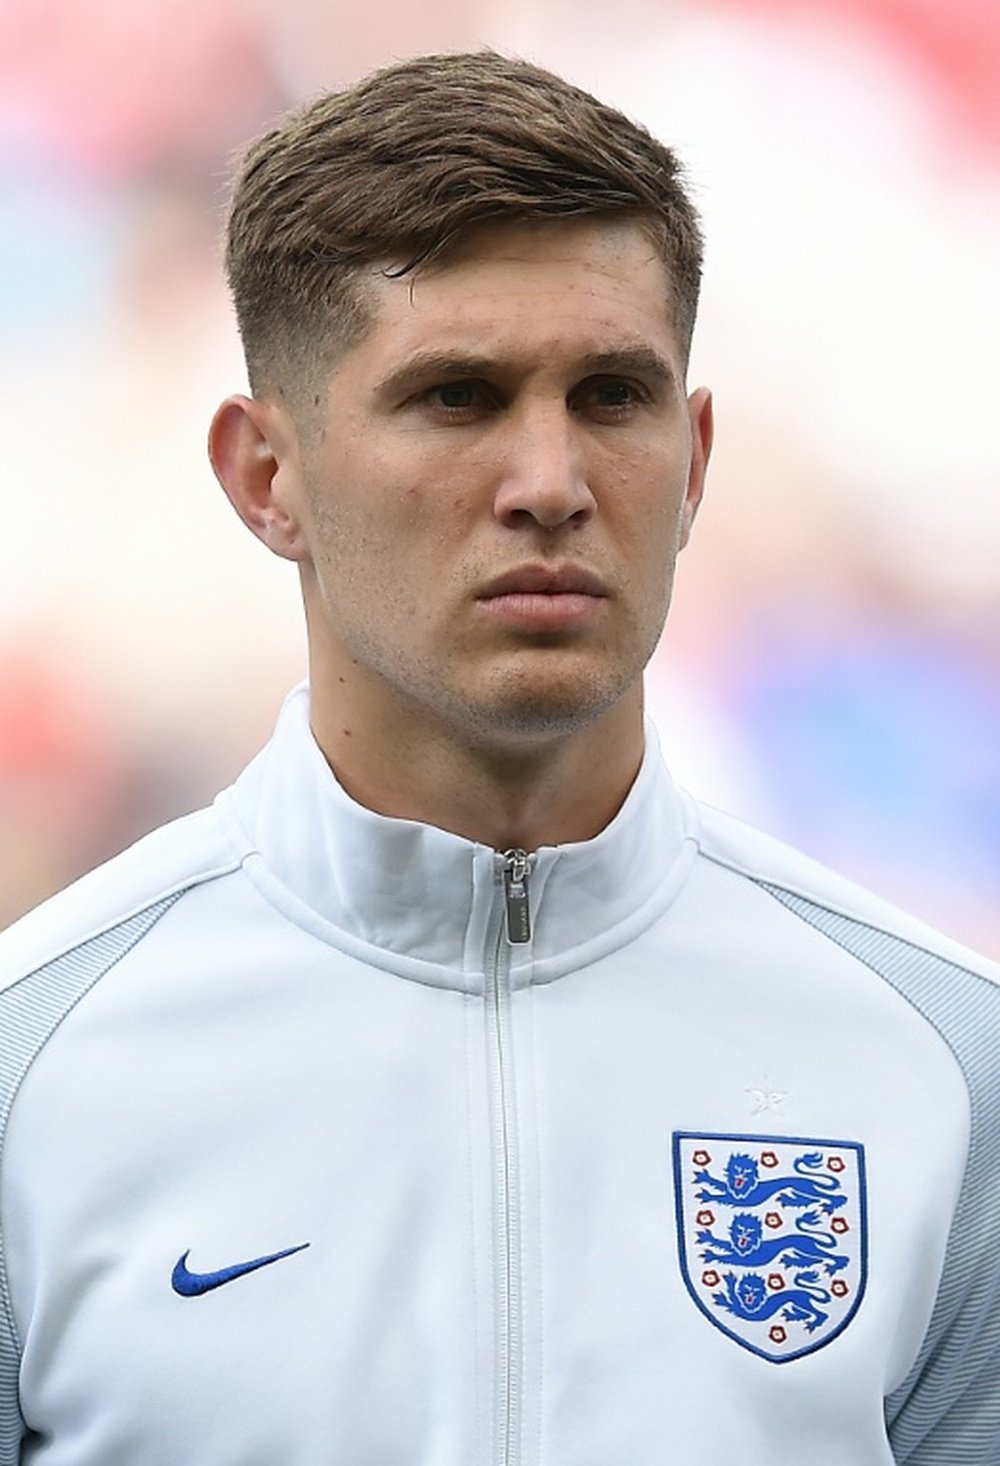 John Stones hails lessons learnt from Guardiola and Southgate.